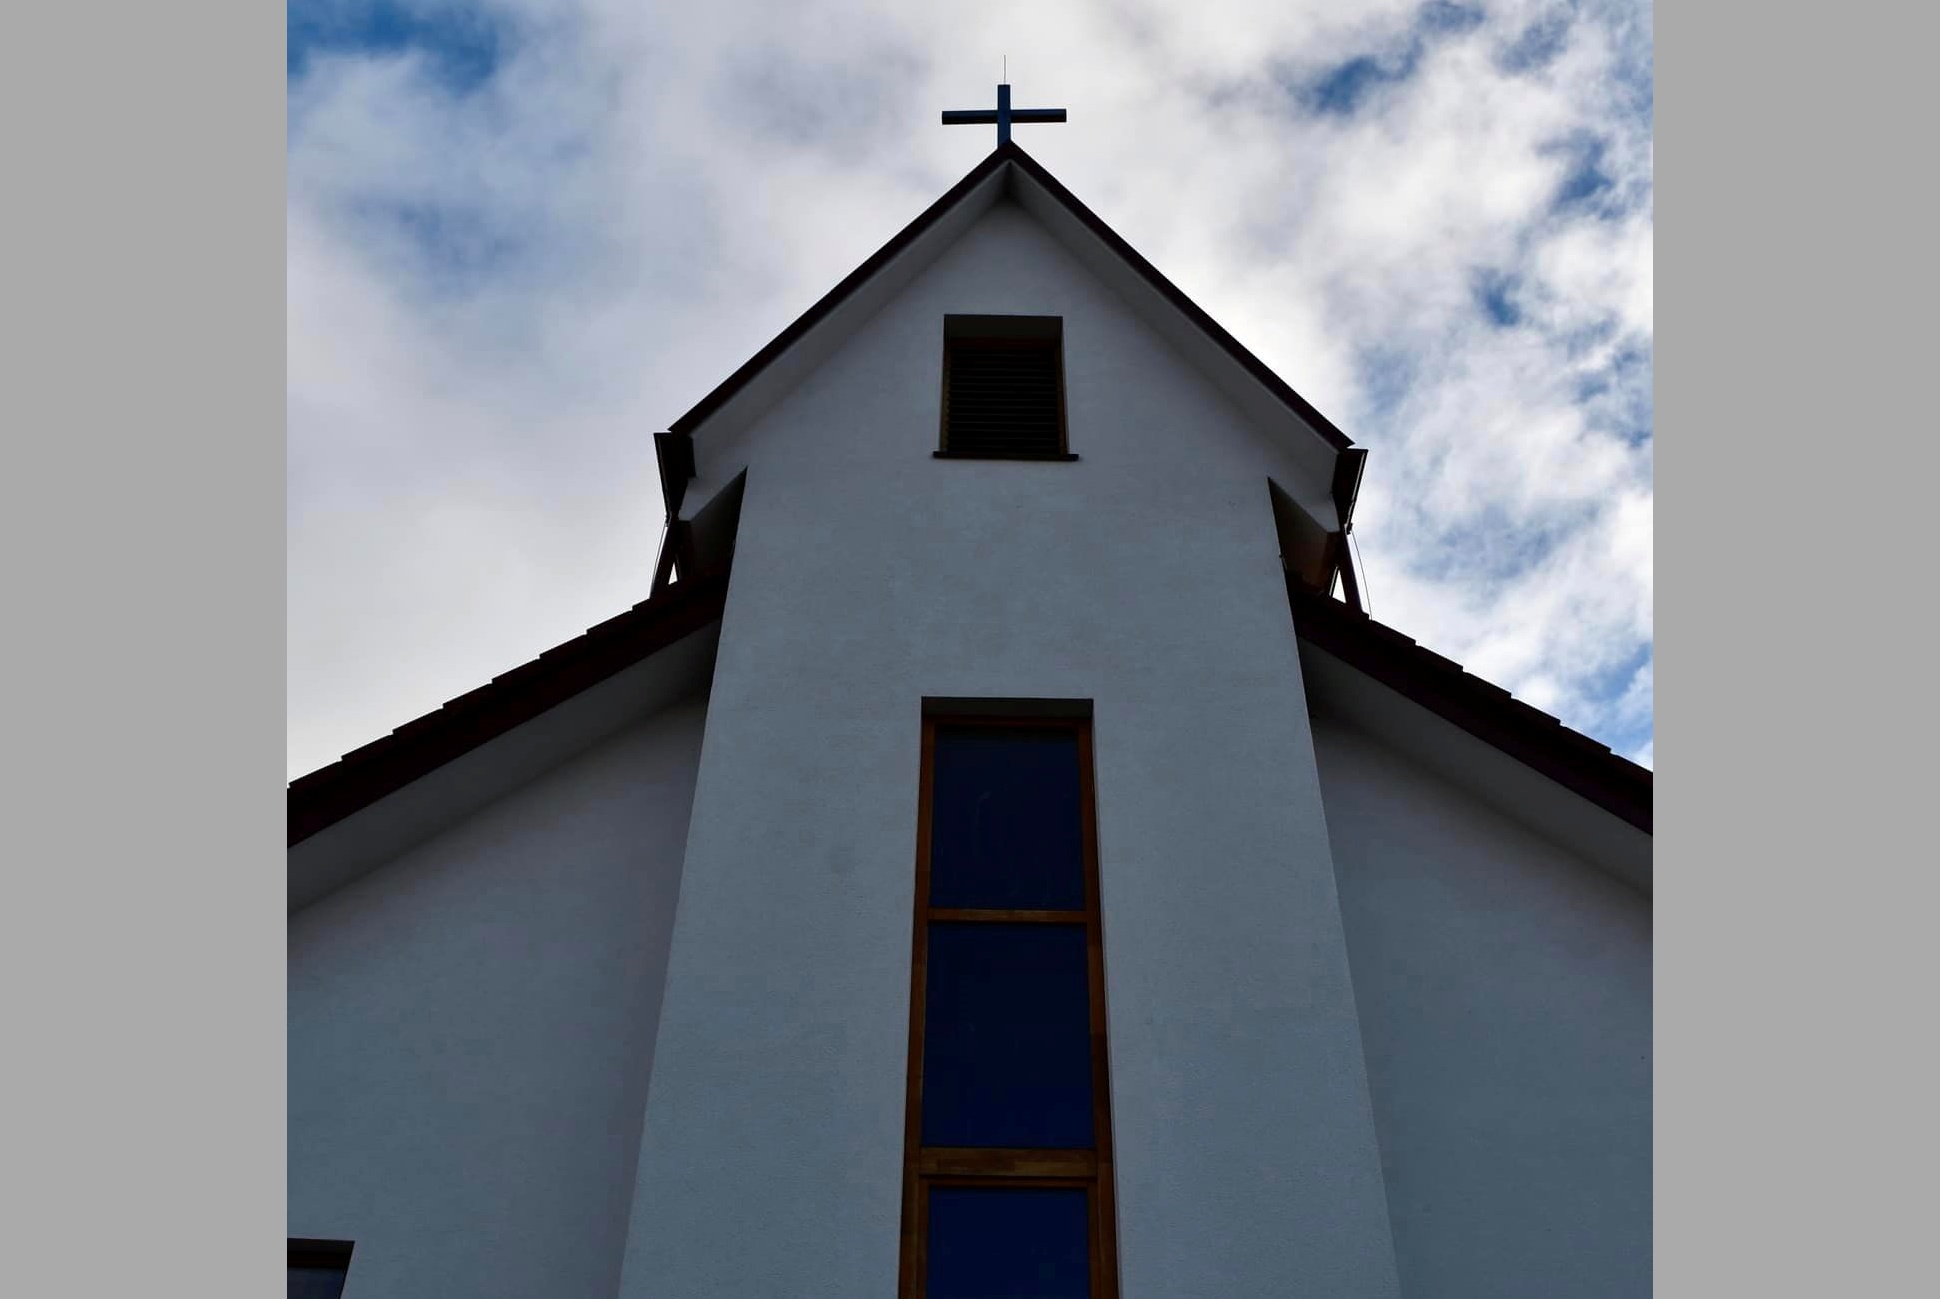 Church in Slovakia Built with Support from Hungarian Government